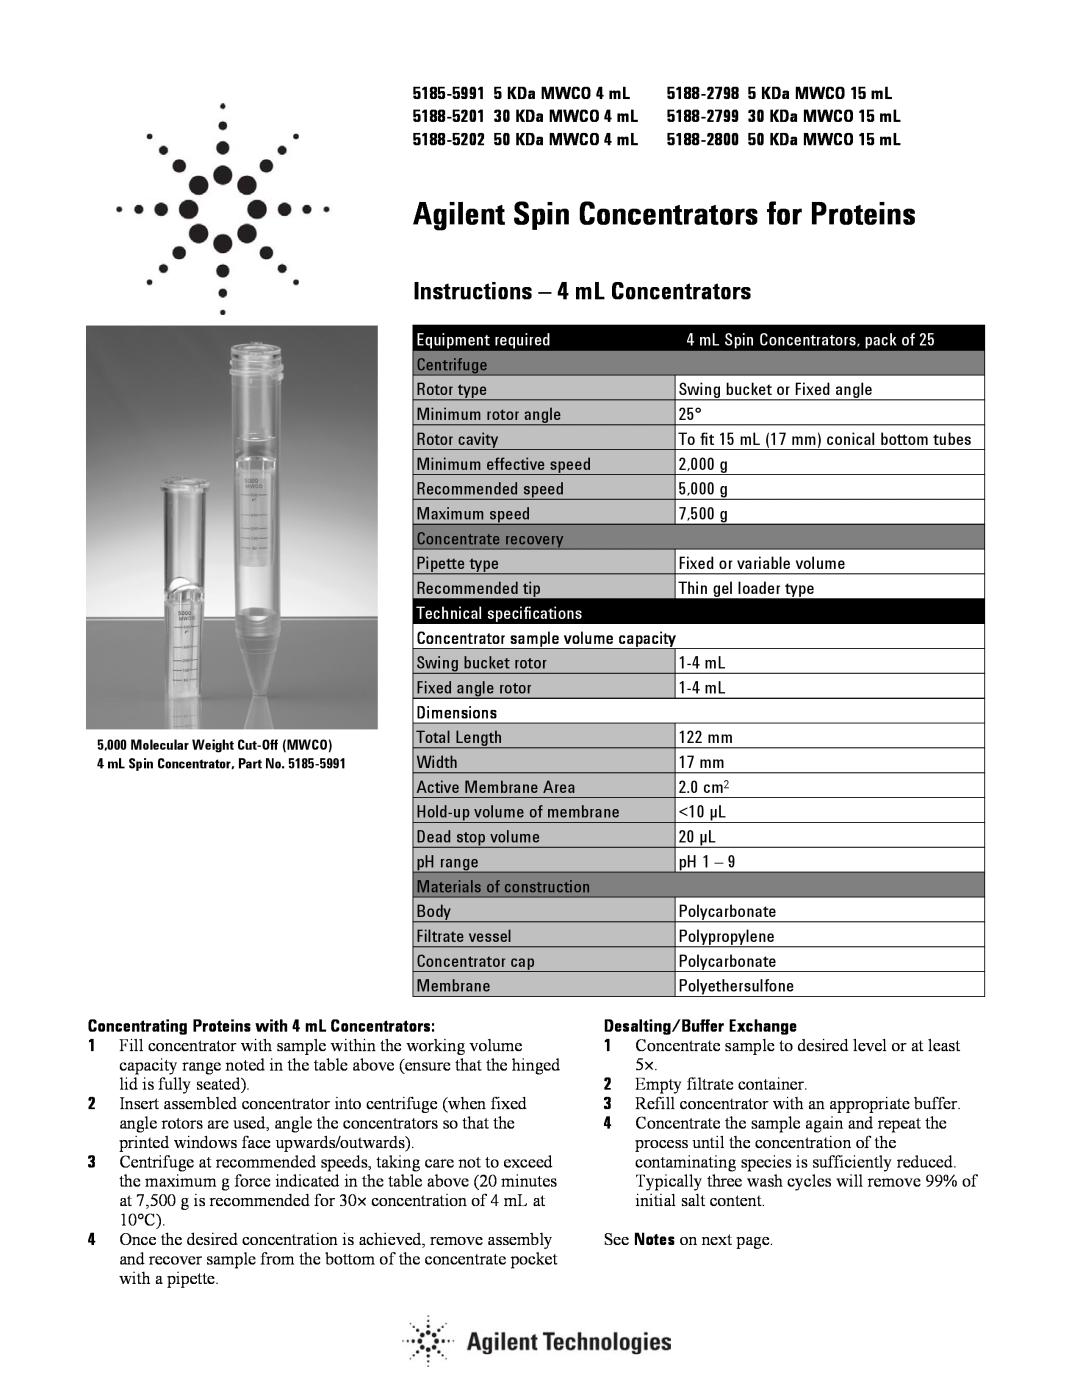 Agilent Technologies 5185-5991 technical specifications Instructions - 4 mL Concentrators, KDa MWCO 4 mL, 5188-2798 